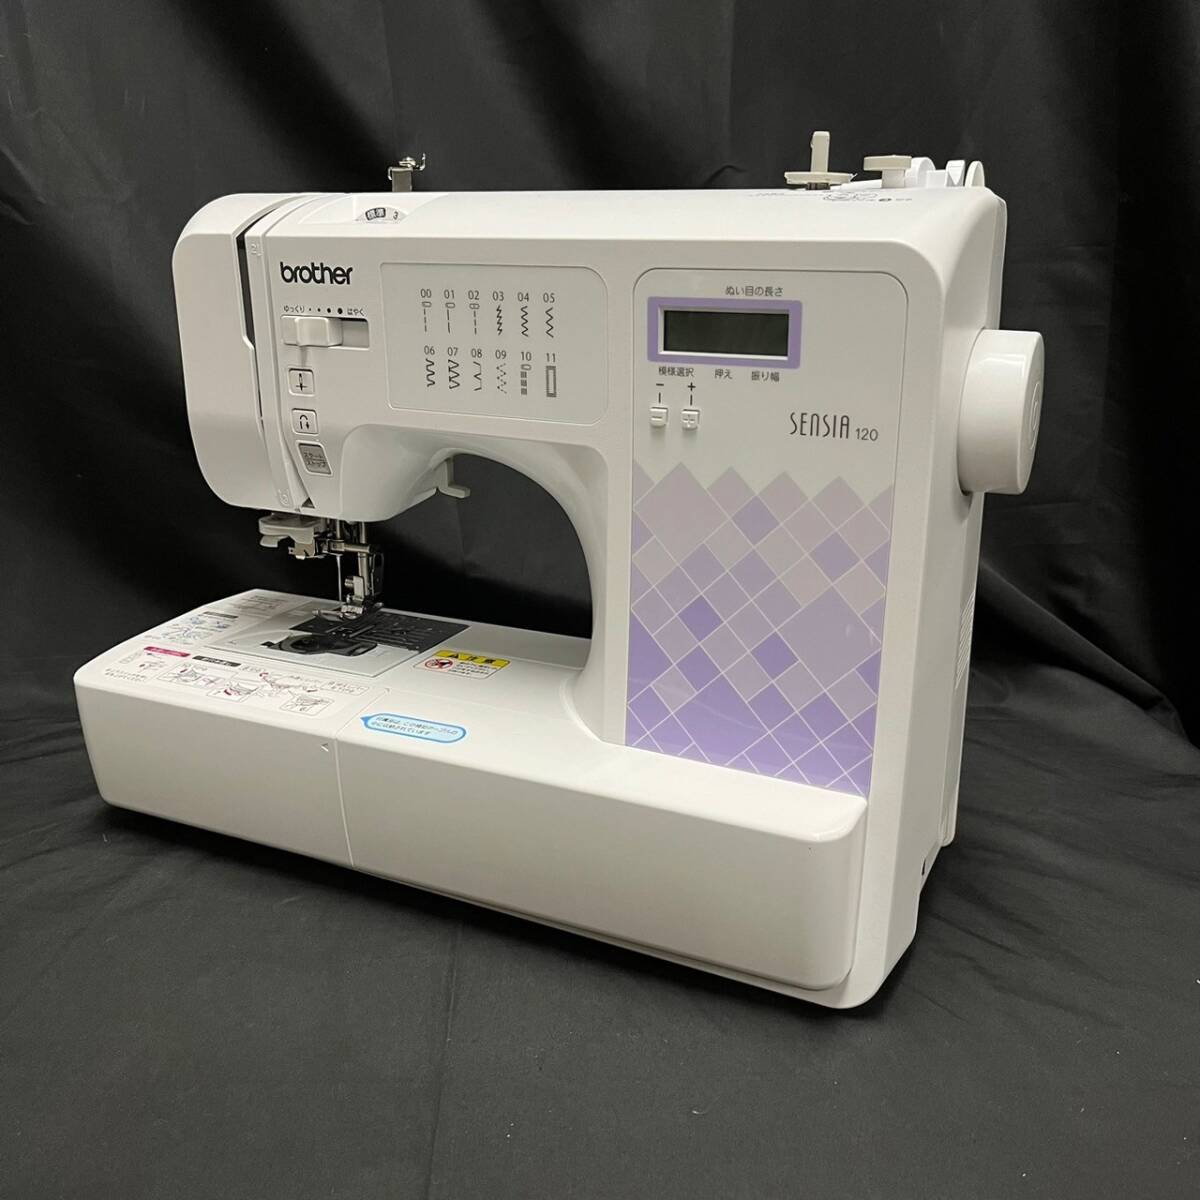 ADK344H Brother CPV7203 SENSIA 120 computer sewing machine home use Brother 